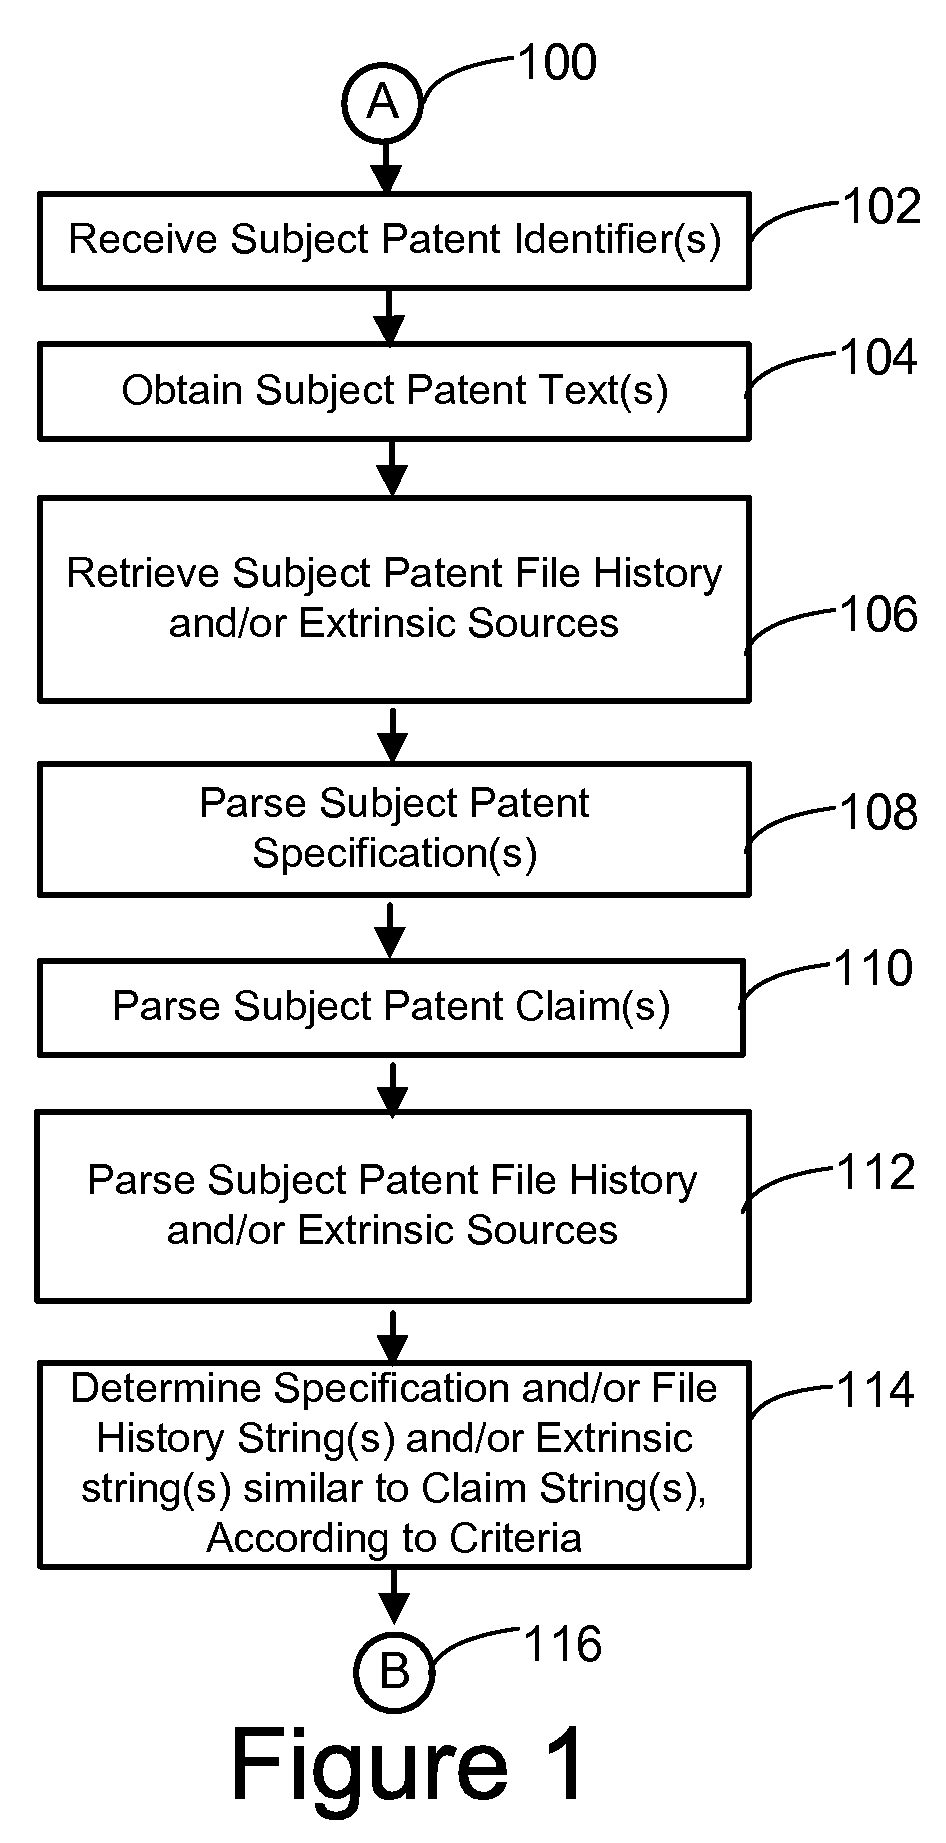 Parsing, analysis and scoring of document content